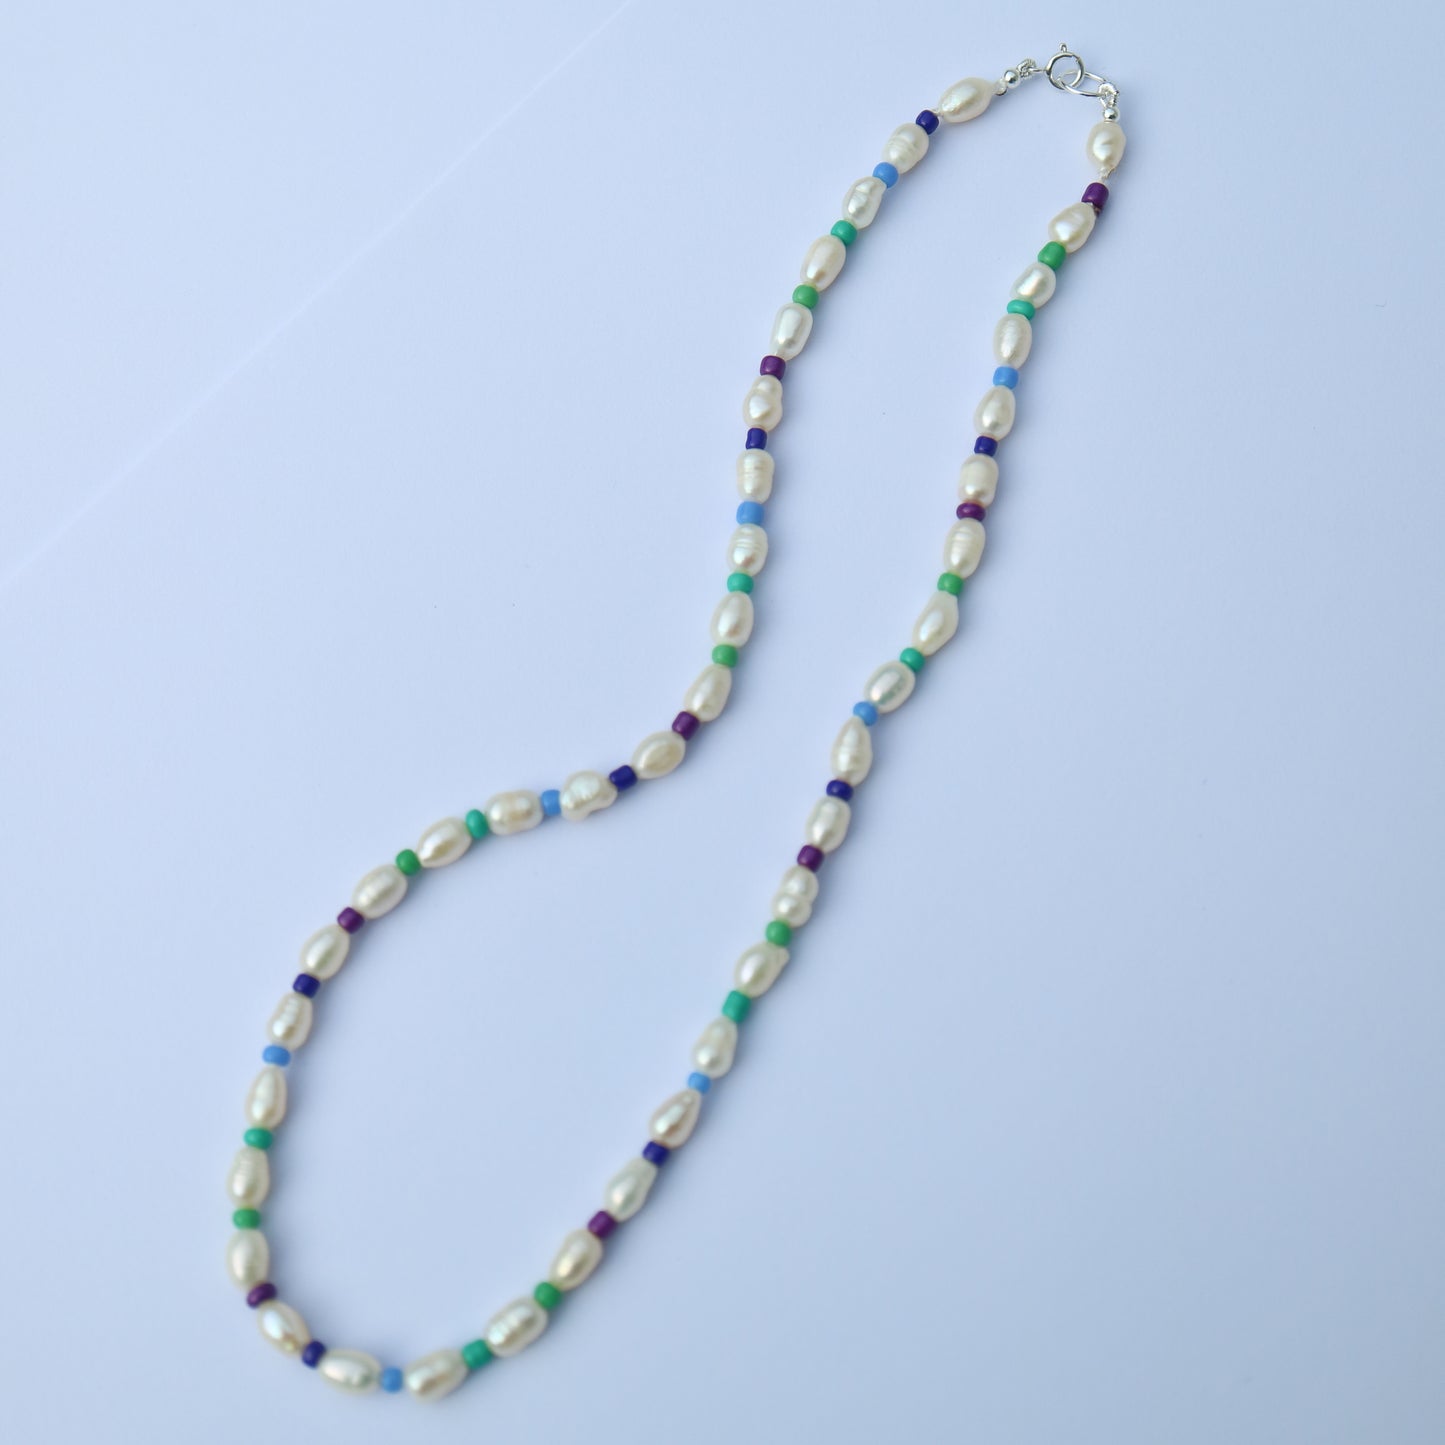 Pearl Necklace with azure blue beads